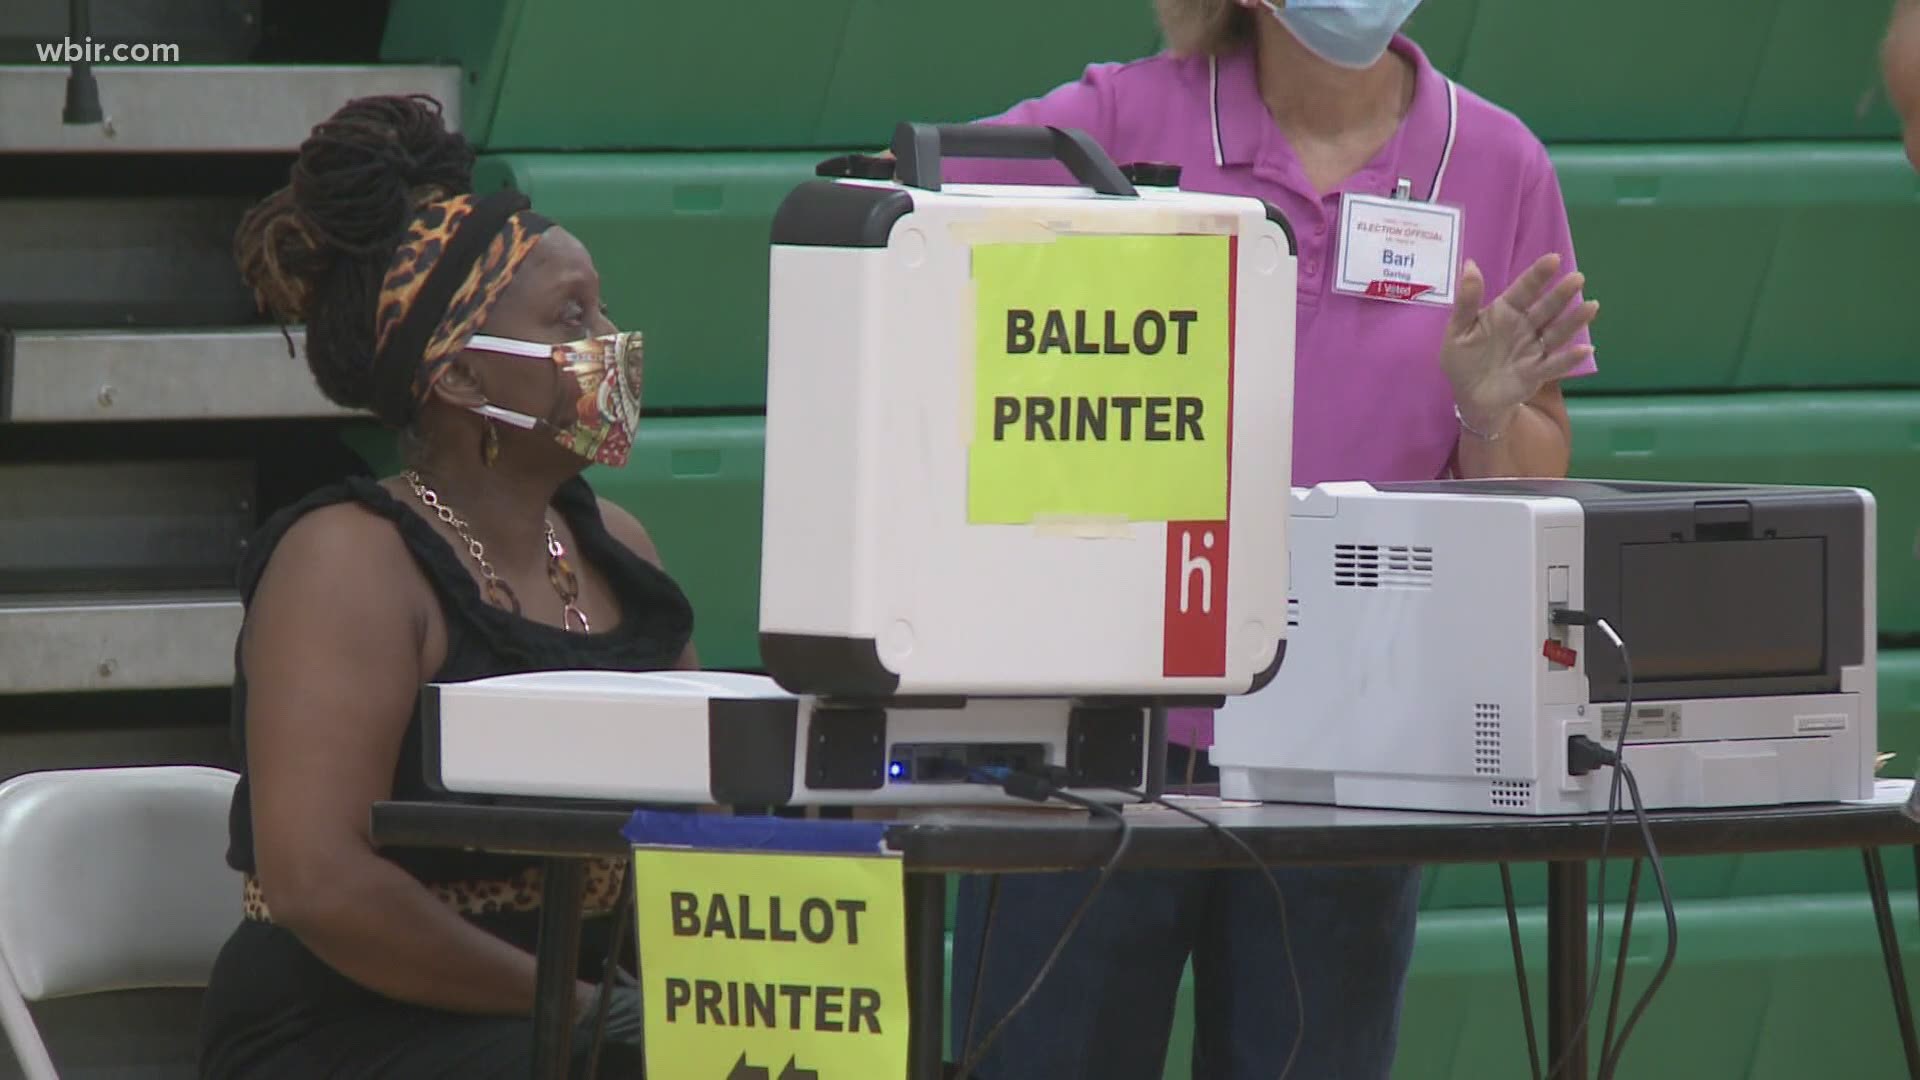 This election brought many changes for voters in Knox County, including a new paper voting system and difficulties due to the COVID-19 pandemic.